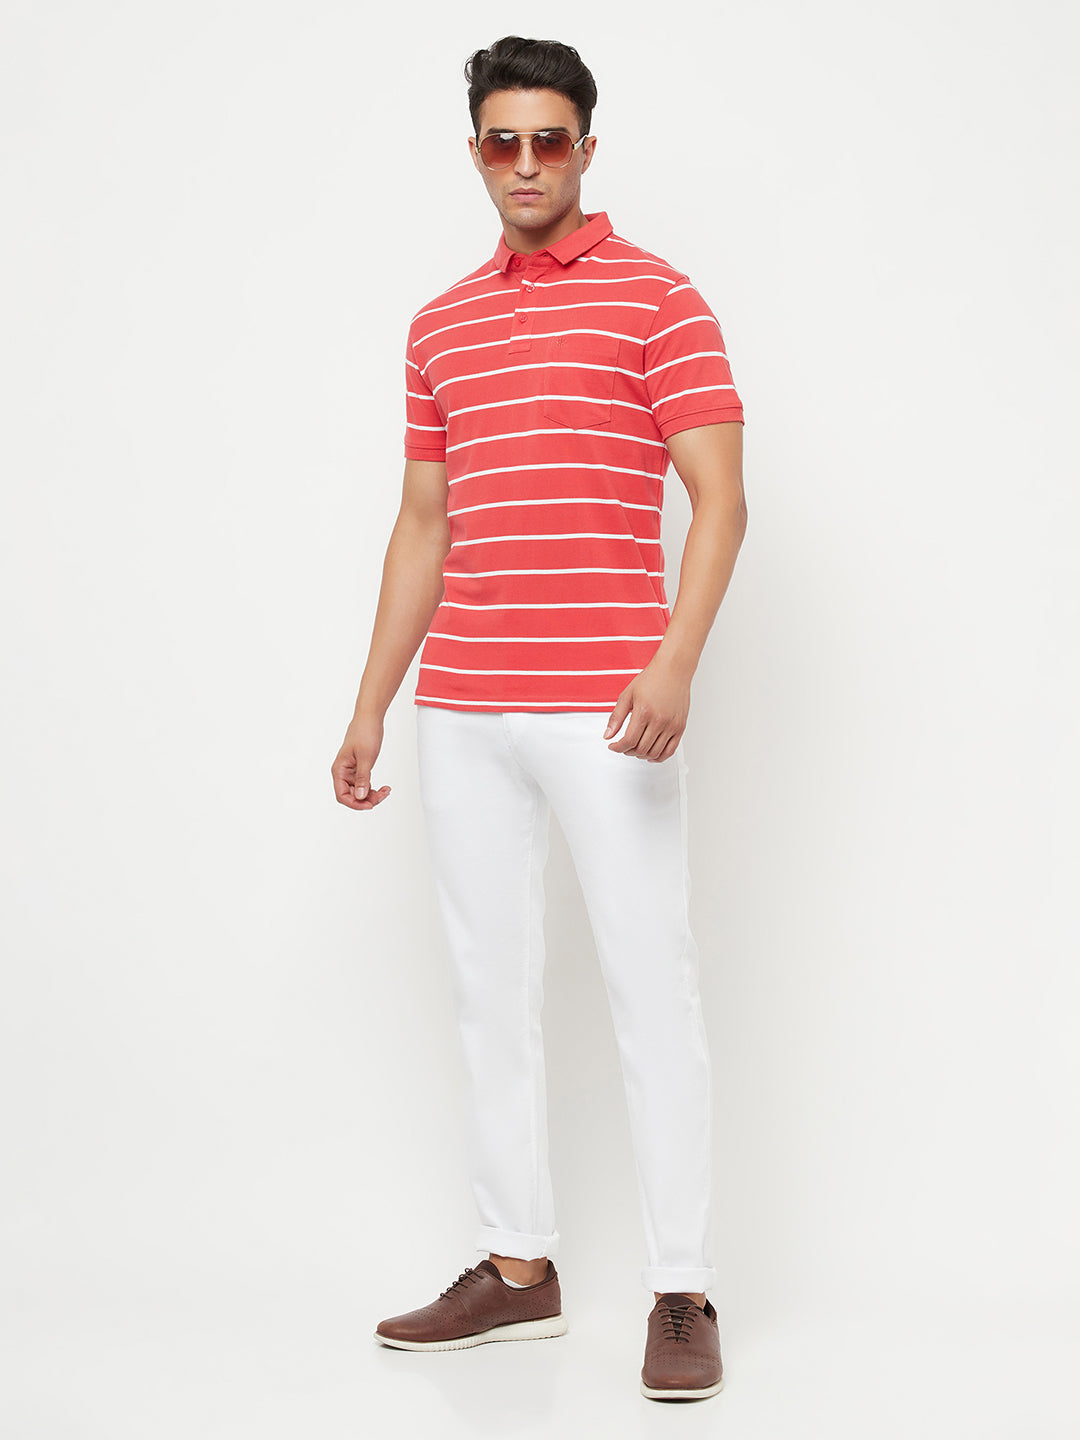 Coral Red Striped Polo T-Shirt - Men T-Shirts